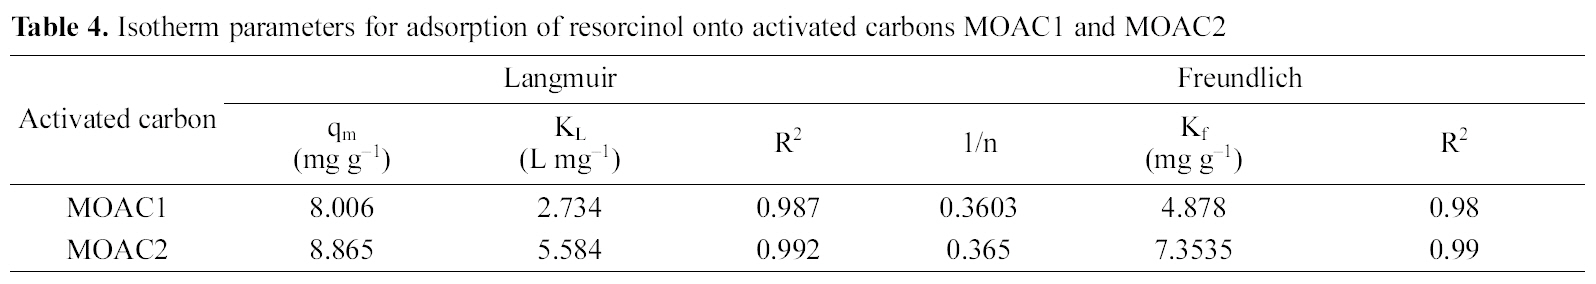 Isotherm parameters for adsorption of resorcinol onto activated carbons MOAC1 and MOAC2